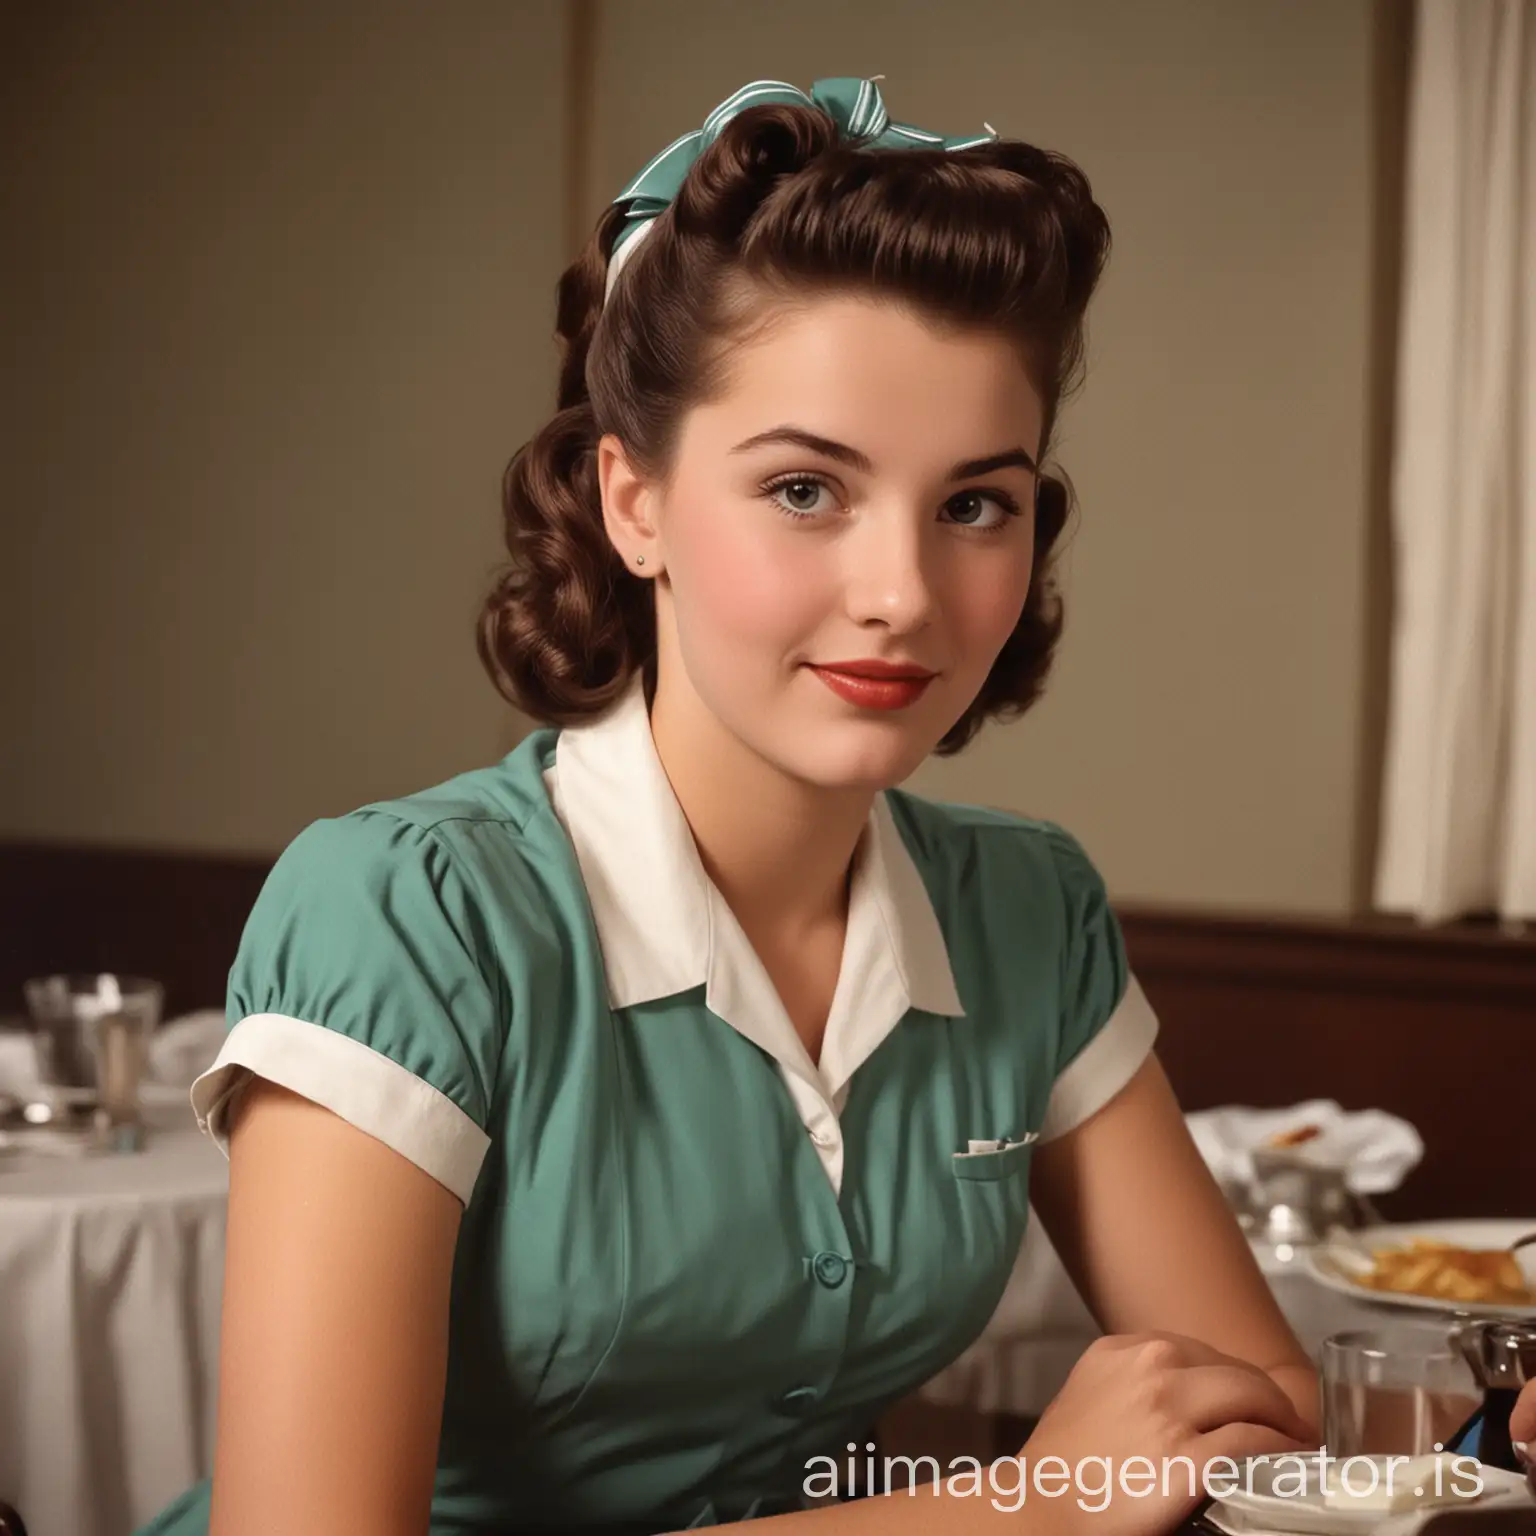 1950s Study of a 20YearOld Woman waitress in color